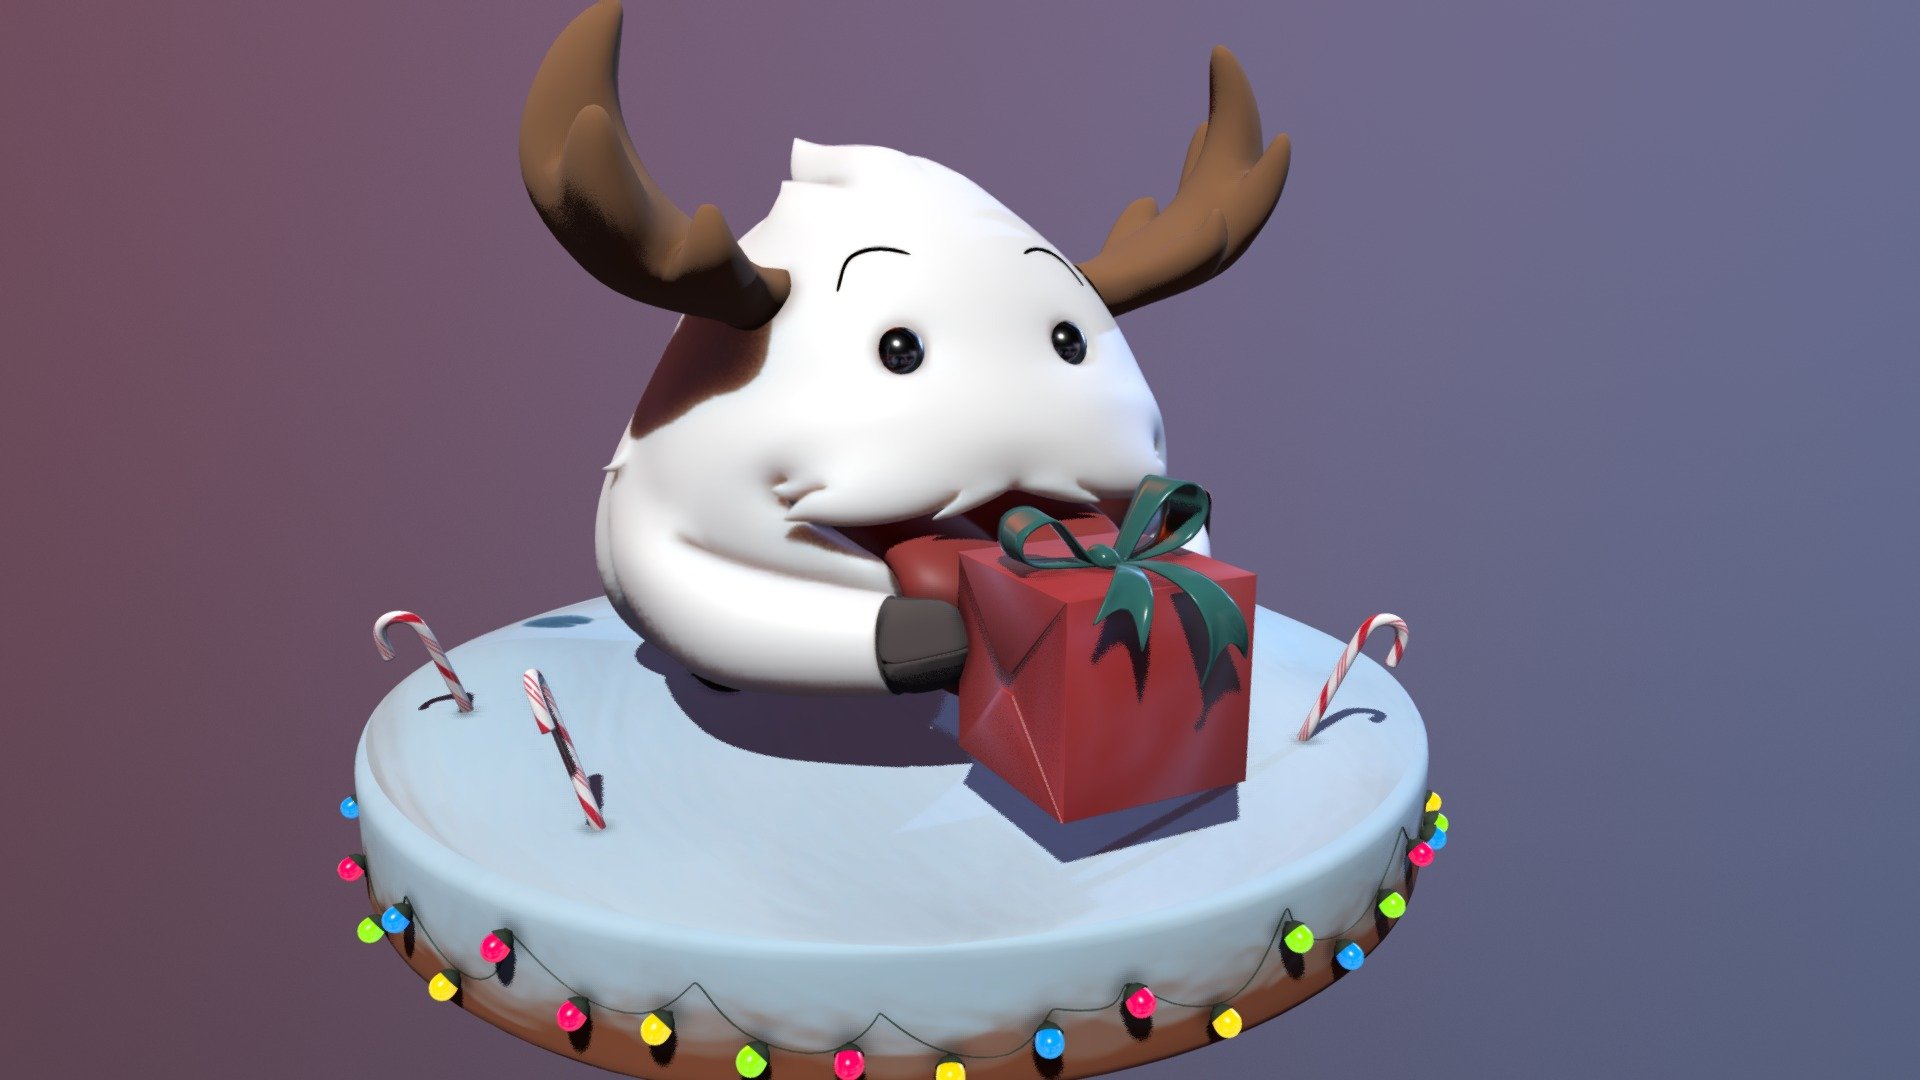 Christmas poro from League of Legends.
This poro appears in the Santa Braum skin of League of Legends.

Made for the weekly challenge at GameDev.tv - Christmas Poro - 3D model by M. Luisa Carrión (@luisacarrion) 3d model